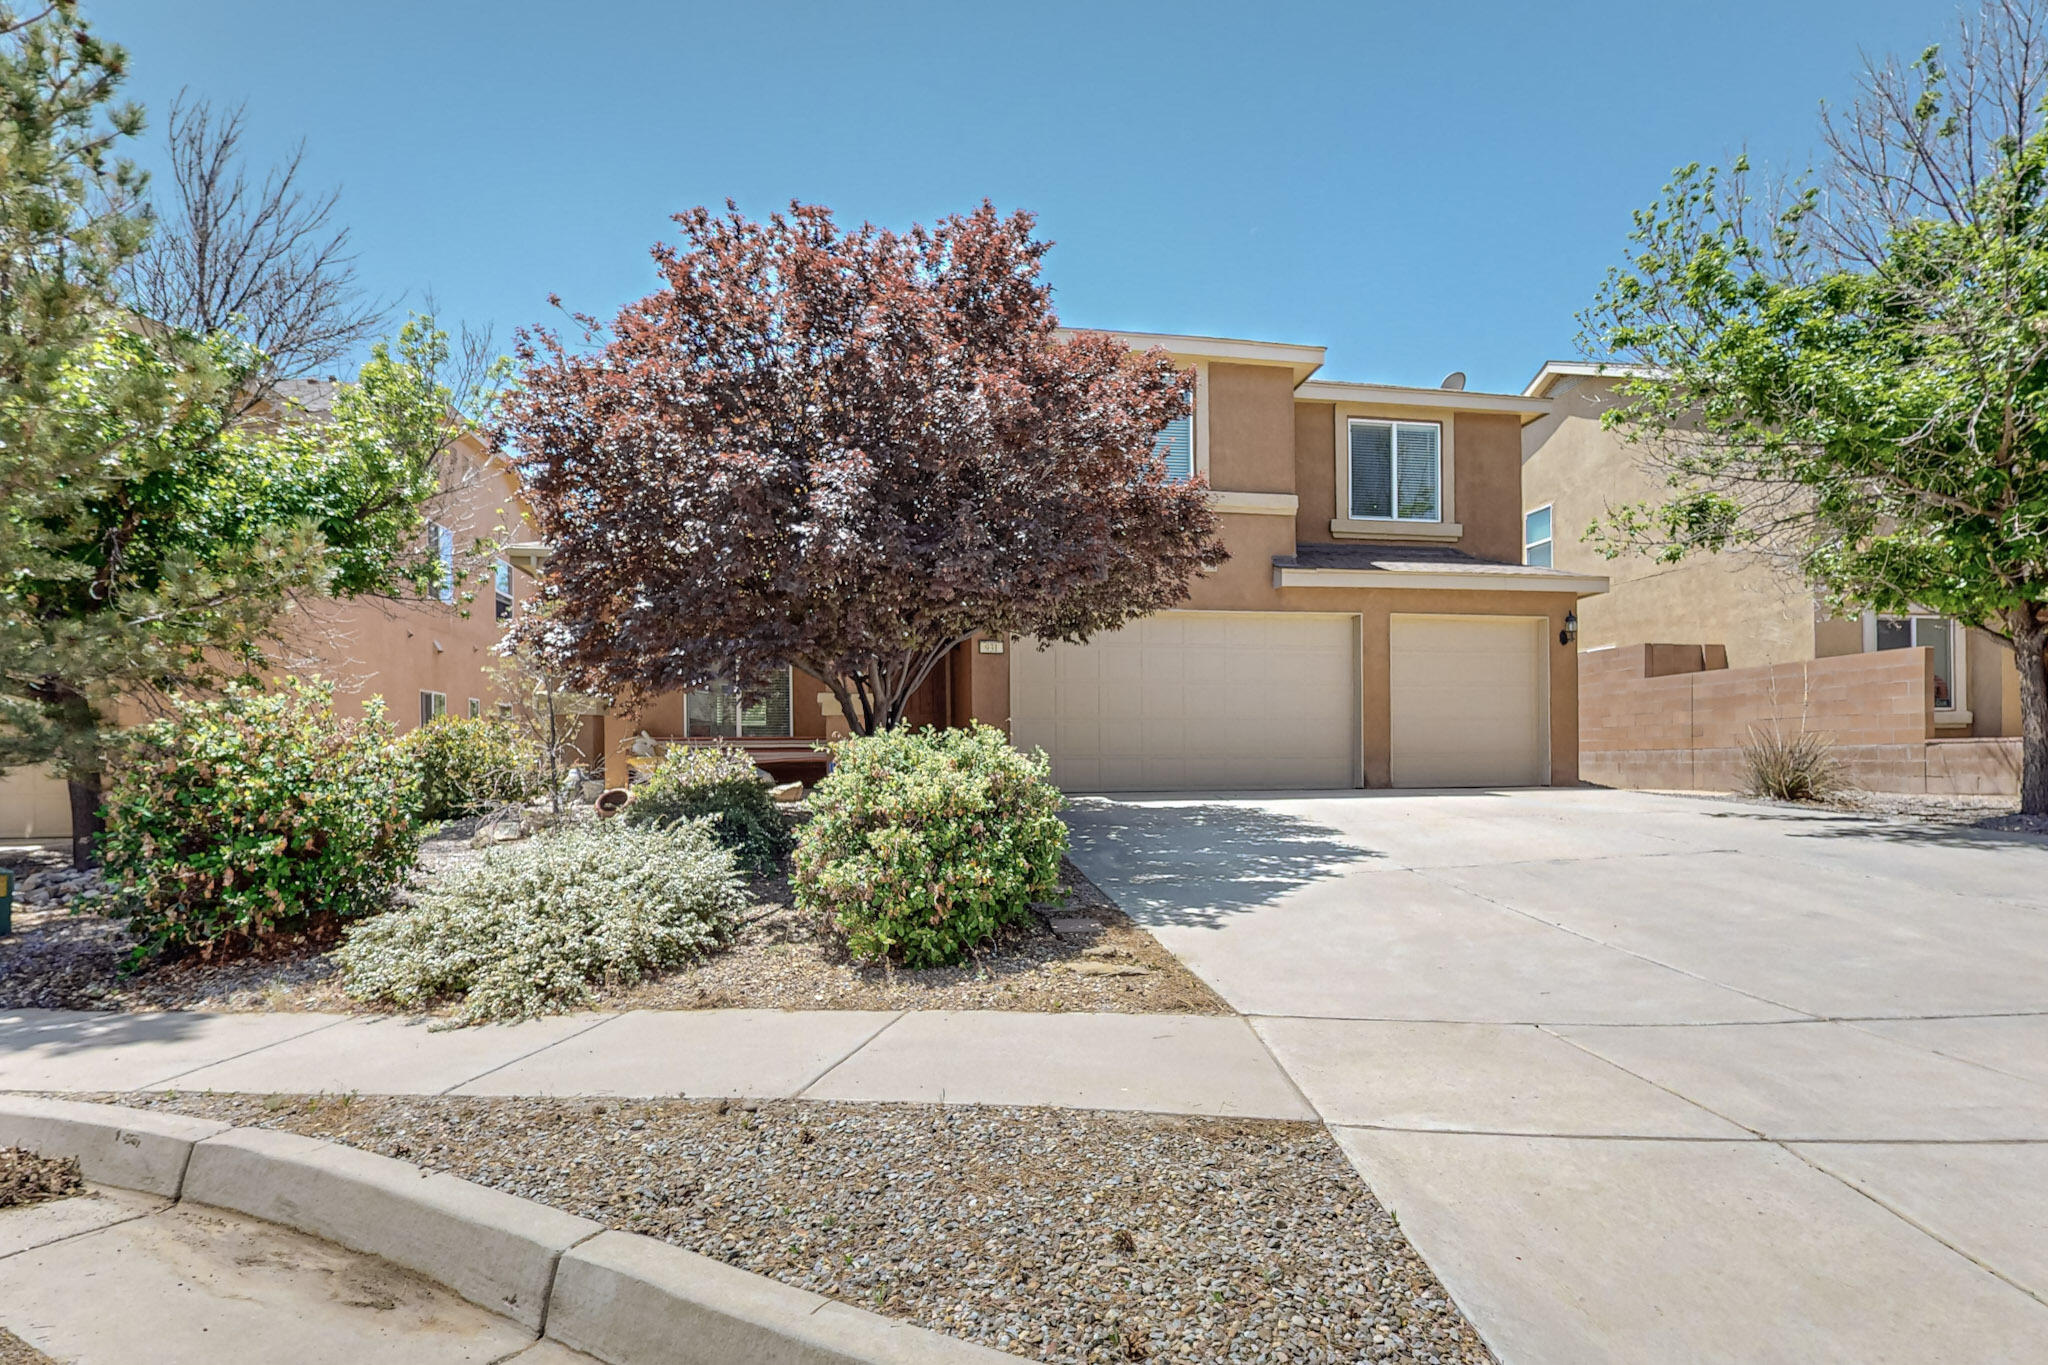 931 Recreo Court NW, Los Lunas, New Mexico 87031, 4 Bedrooms Bedrooms, ,3 BathroomsBathrooms,Residential,For Sale,931 Recreo Court NW,1061499